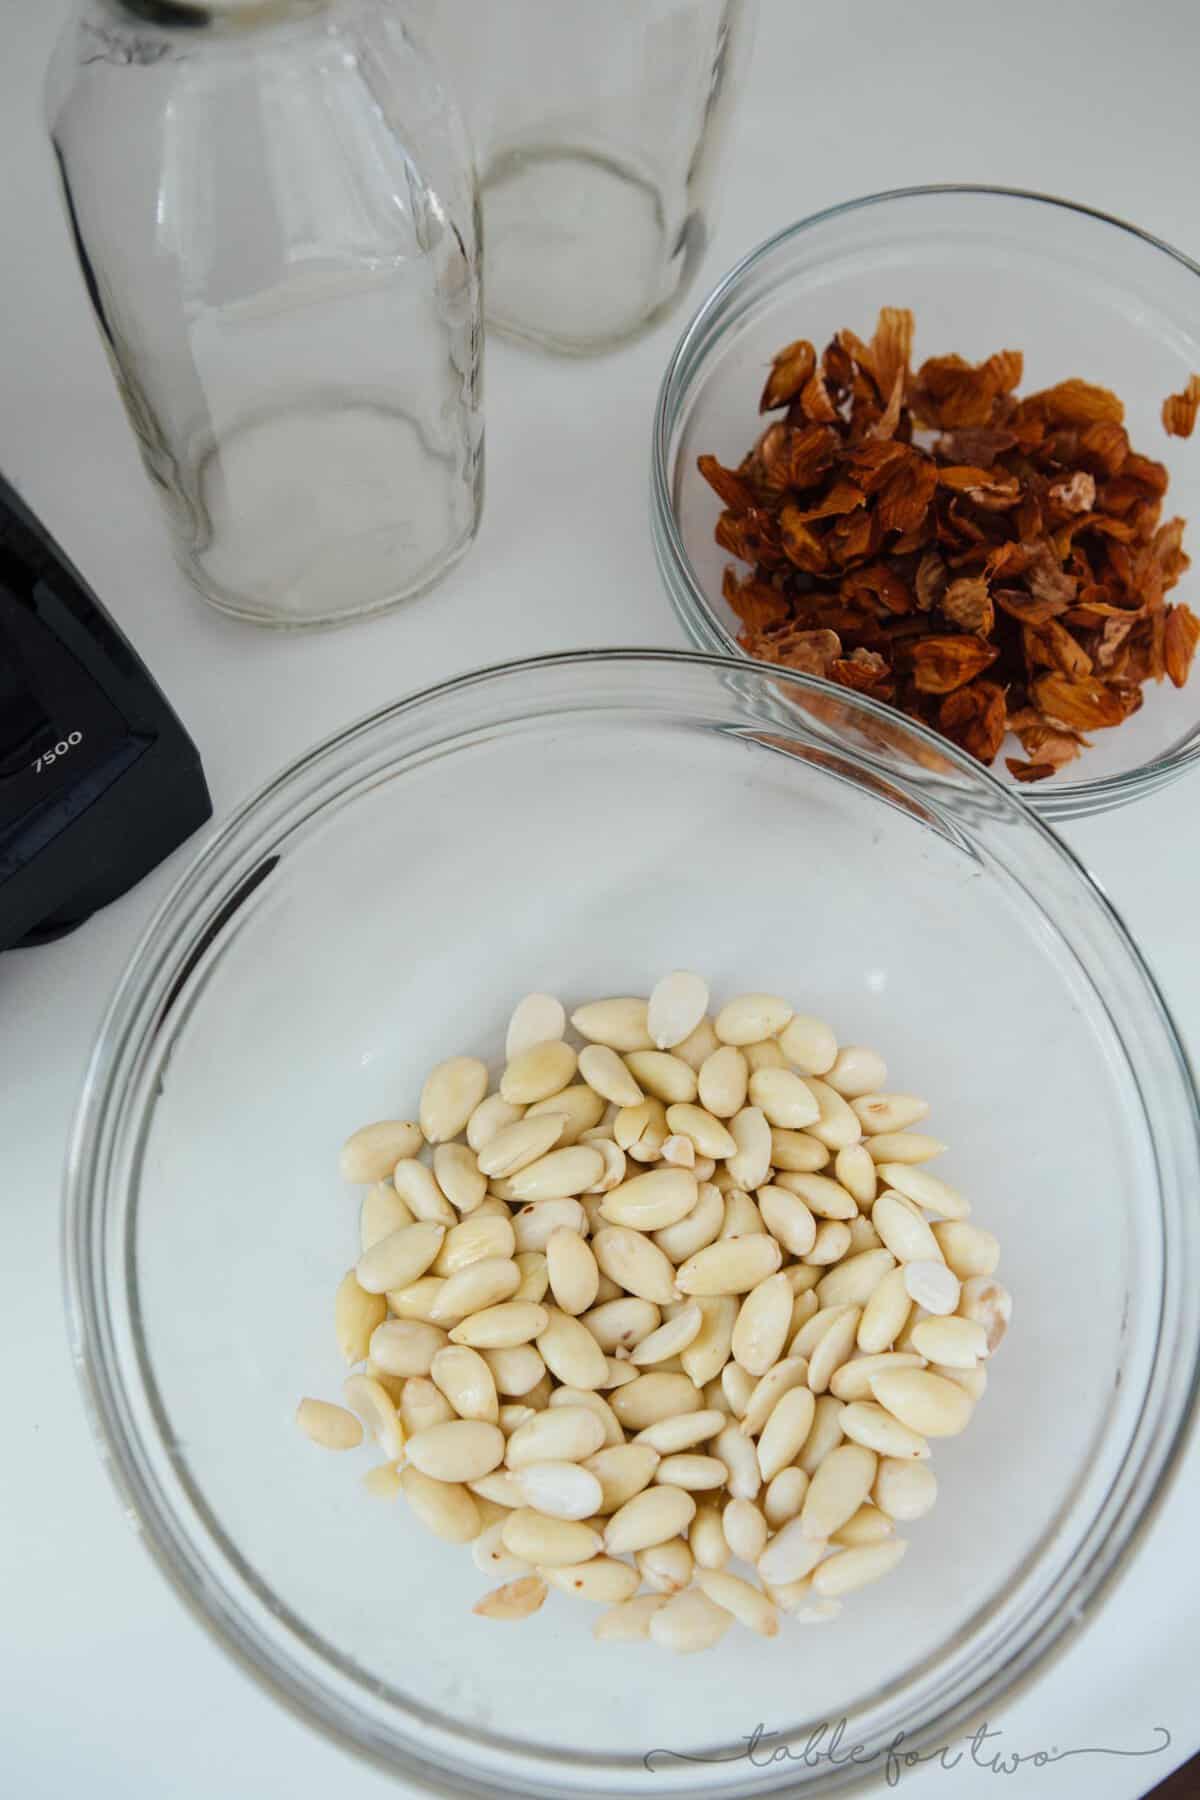 Making your own almond (milk) beverage at home is super easy and it seriously tastes so much cleaner and better than the store-bought kind. You know exactly what goes into it — almonds and water — and you can add additional flavors if you desire!